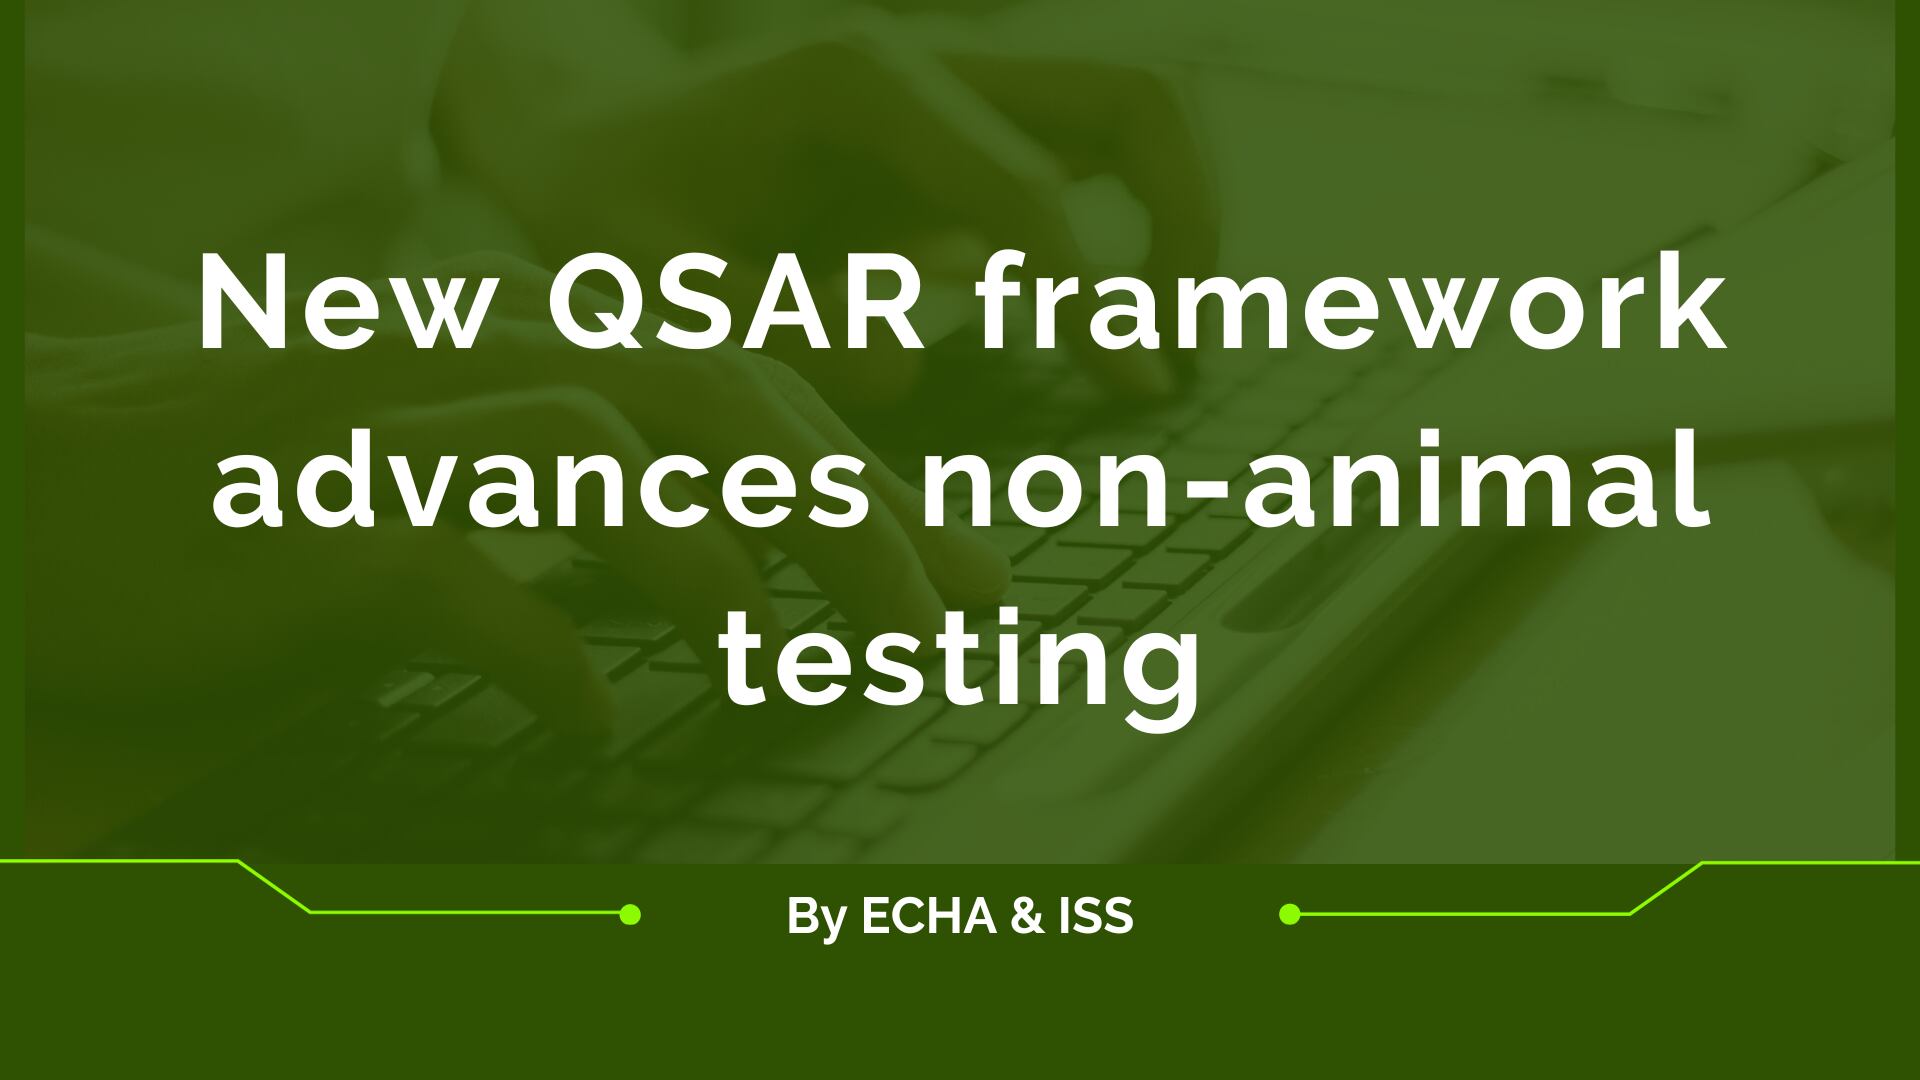 QSAR assessment supports alternatives to animal testing